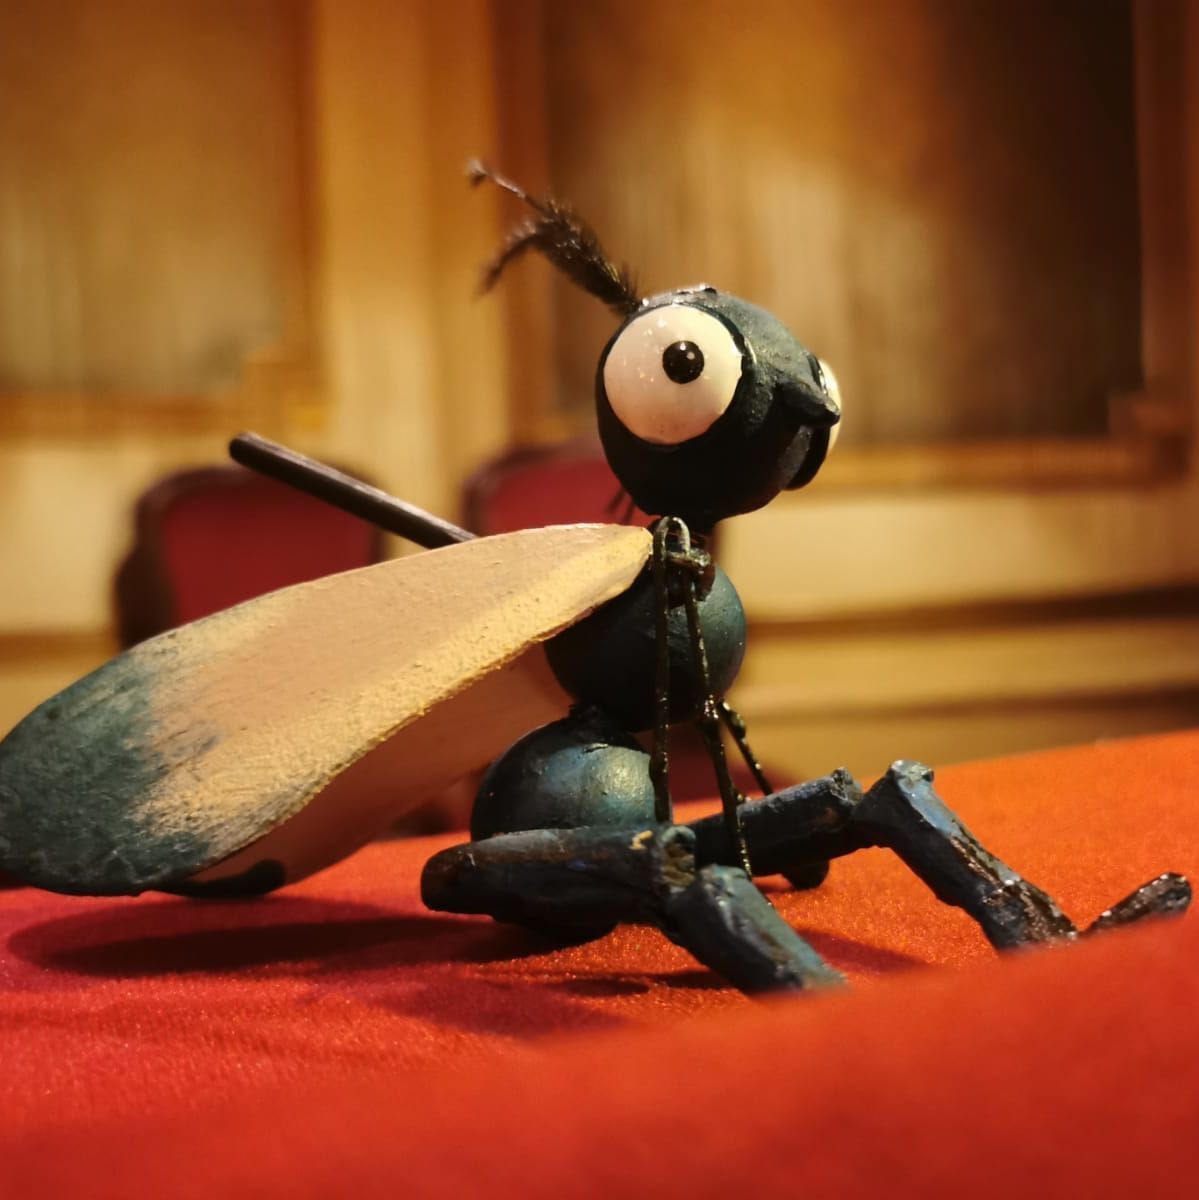 We are SO excited about our upcoming show 'Du Iz Tak?, a story told through the language of insects about the cycle of life and all its impermanence. Come and peer into a miniature world of little puppets to see a delightful group of friends exploring their ever-changing home!